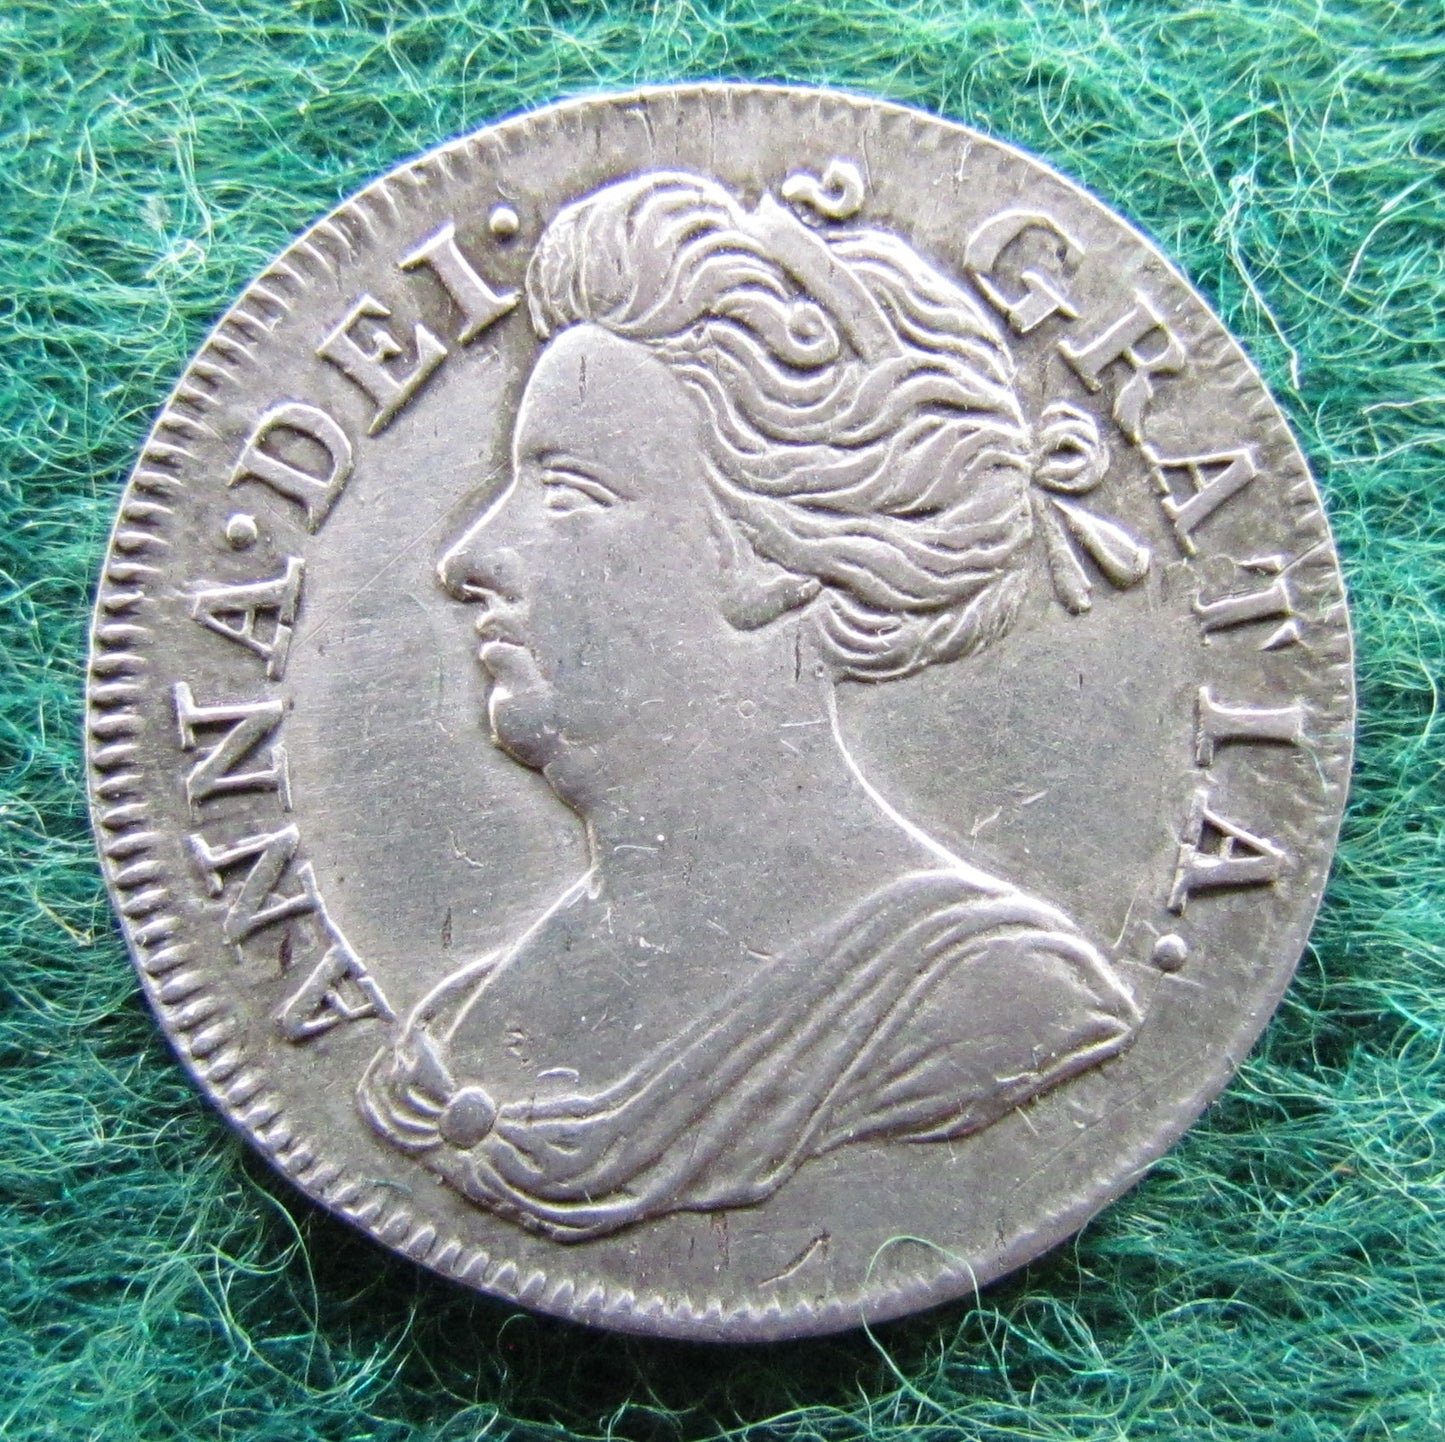 GB British UK English 1713 Four Pence Groat Queen Anne Coin